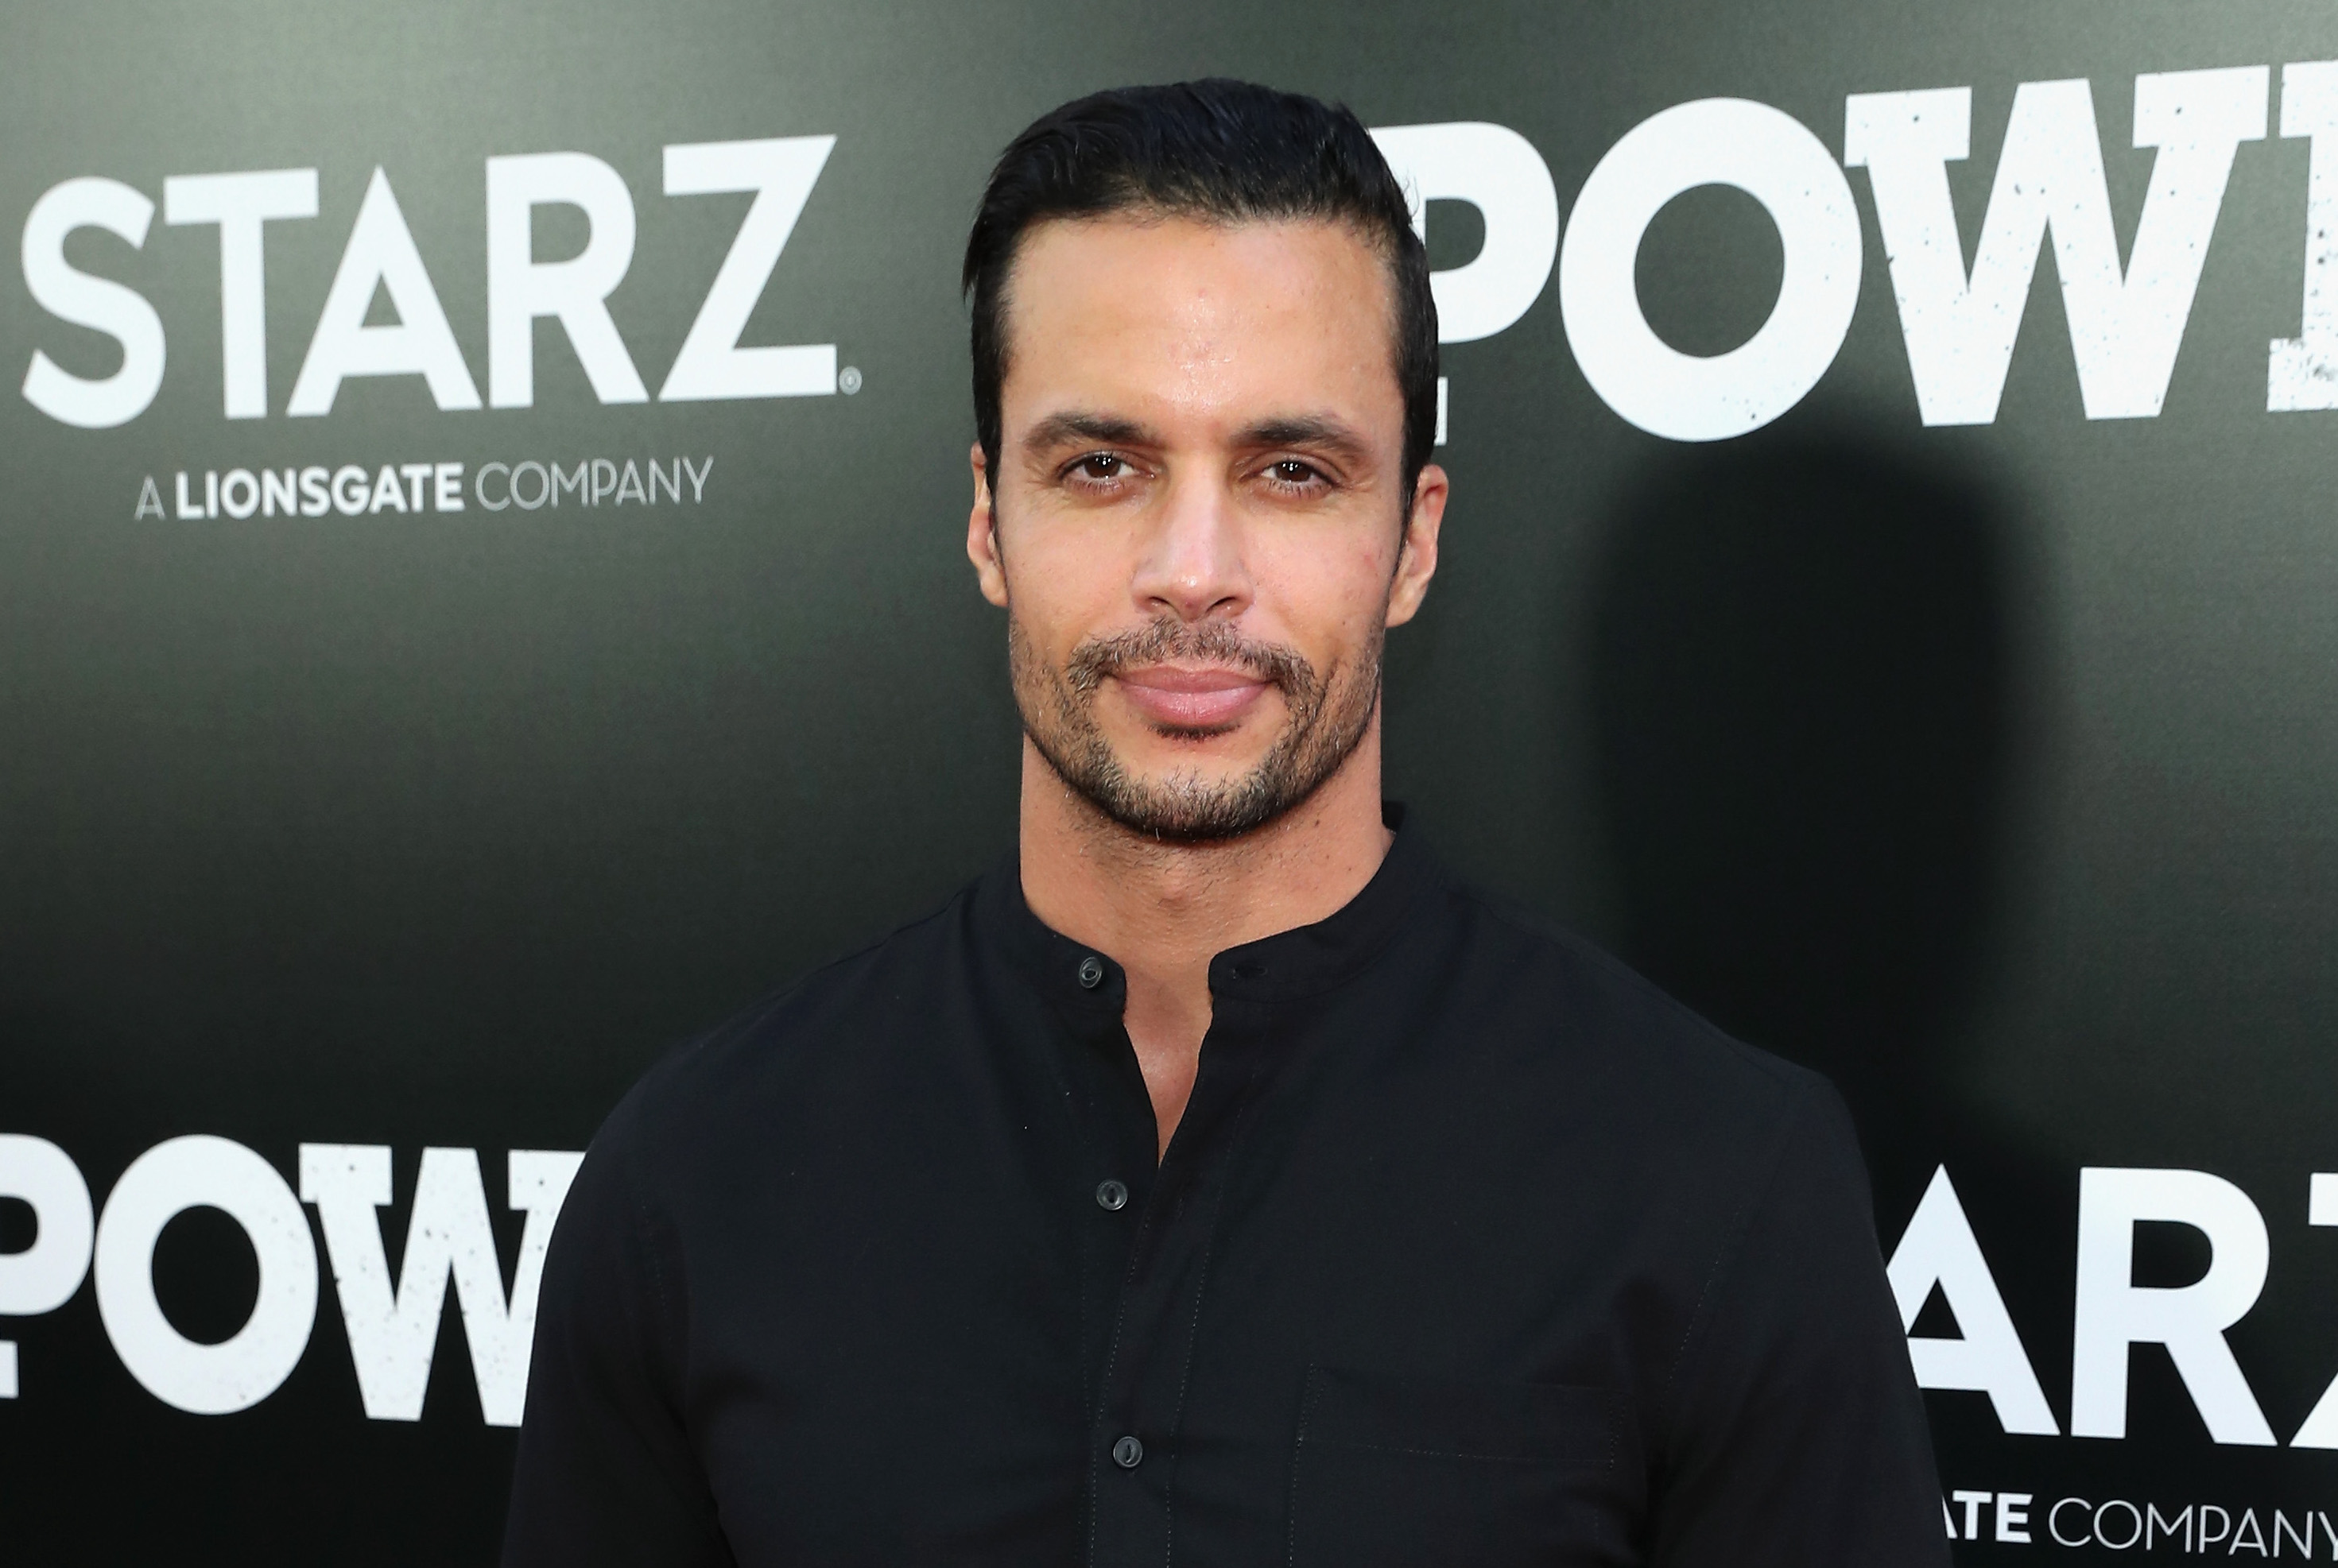 Matthew Cedeño, who is rumored to reprise his role as Cristobal in 'Power Book II: Ghost,' poses on the red carpet wearing a black shirt with his hair slicked back